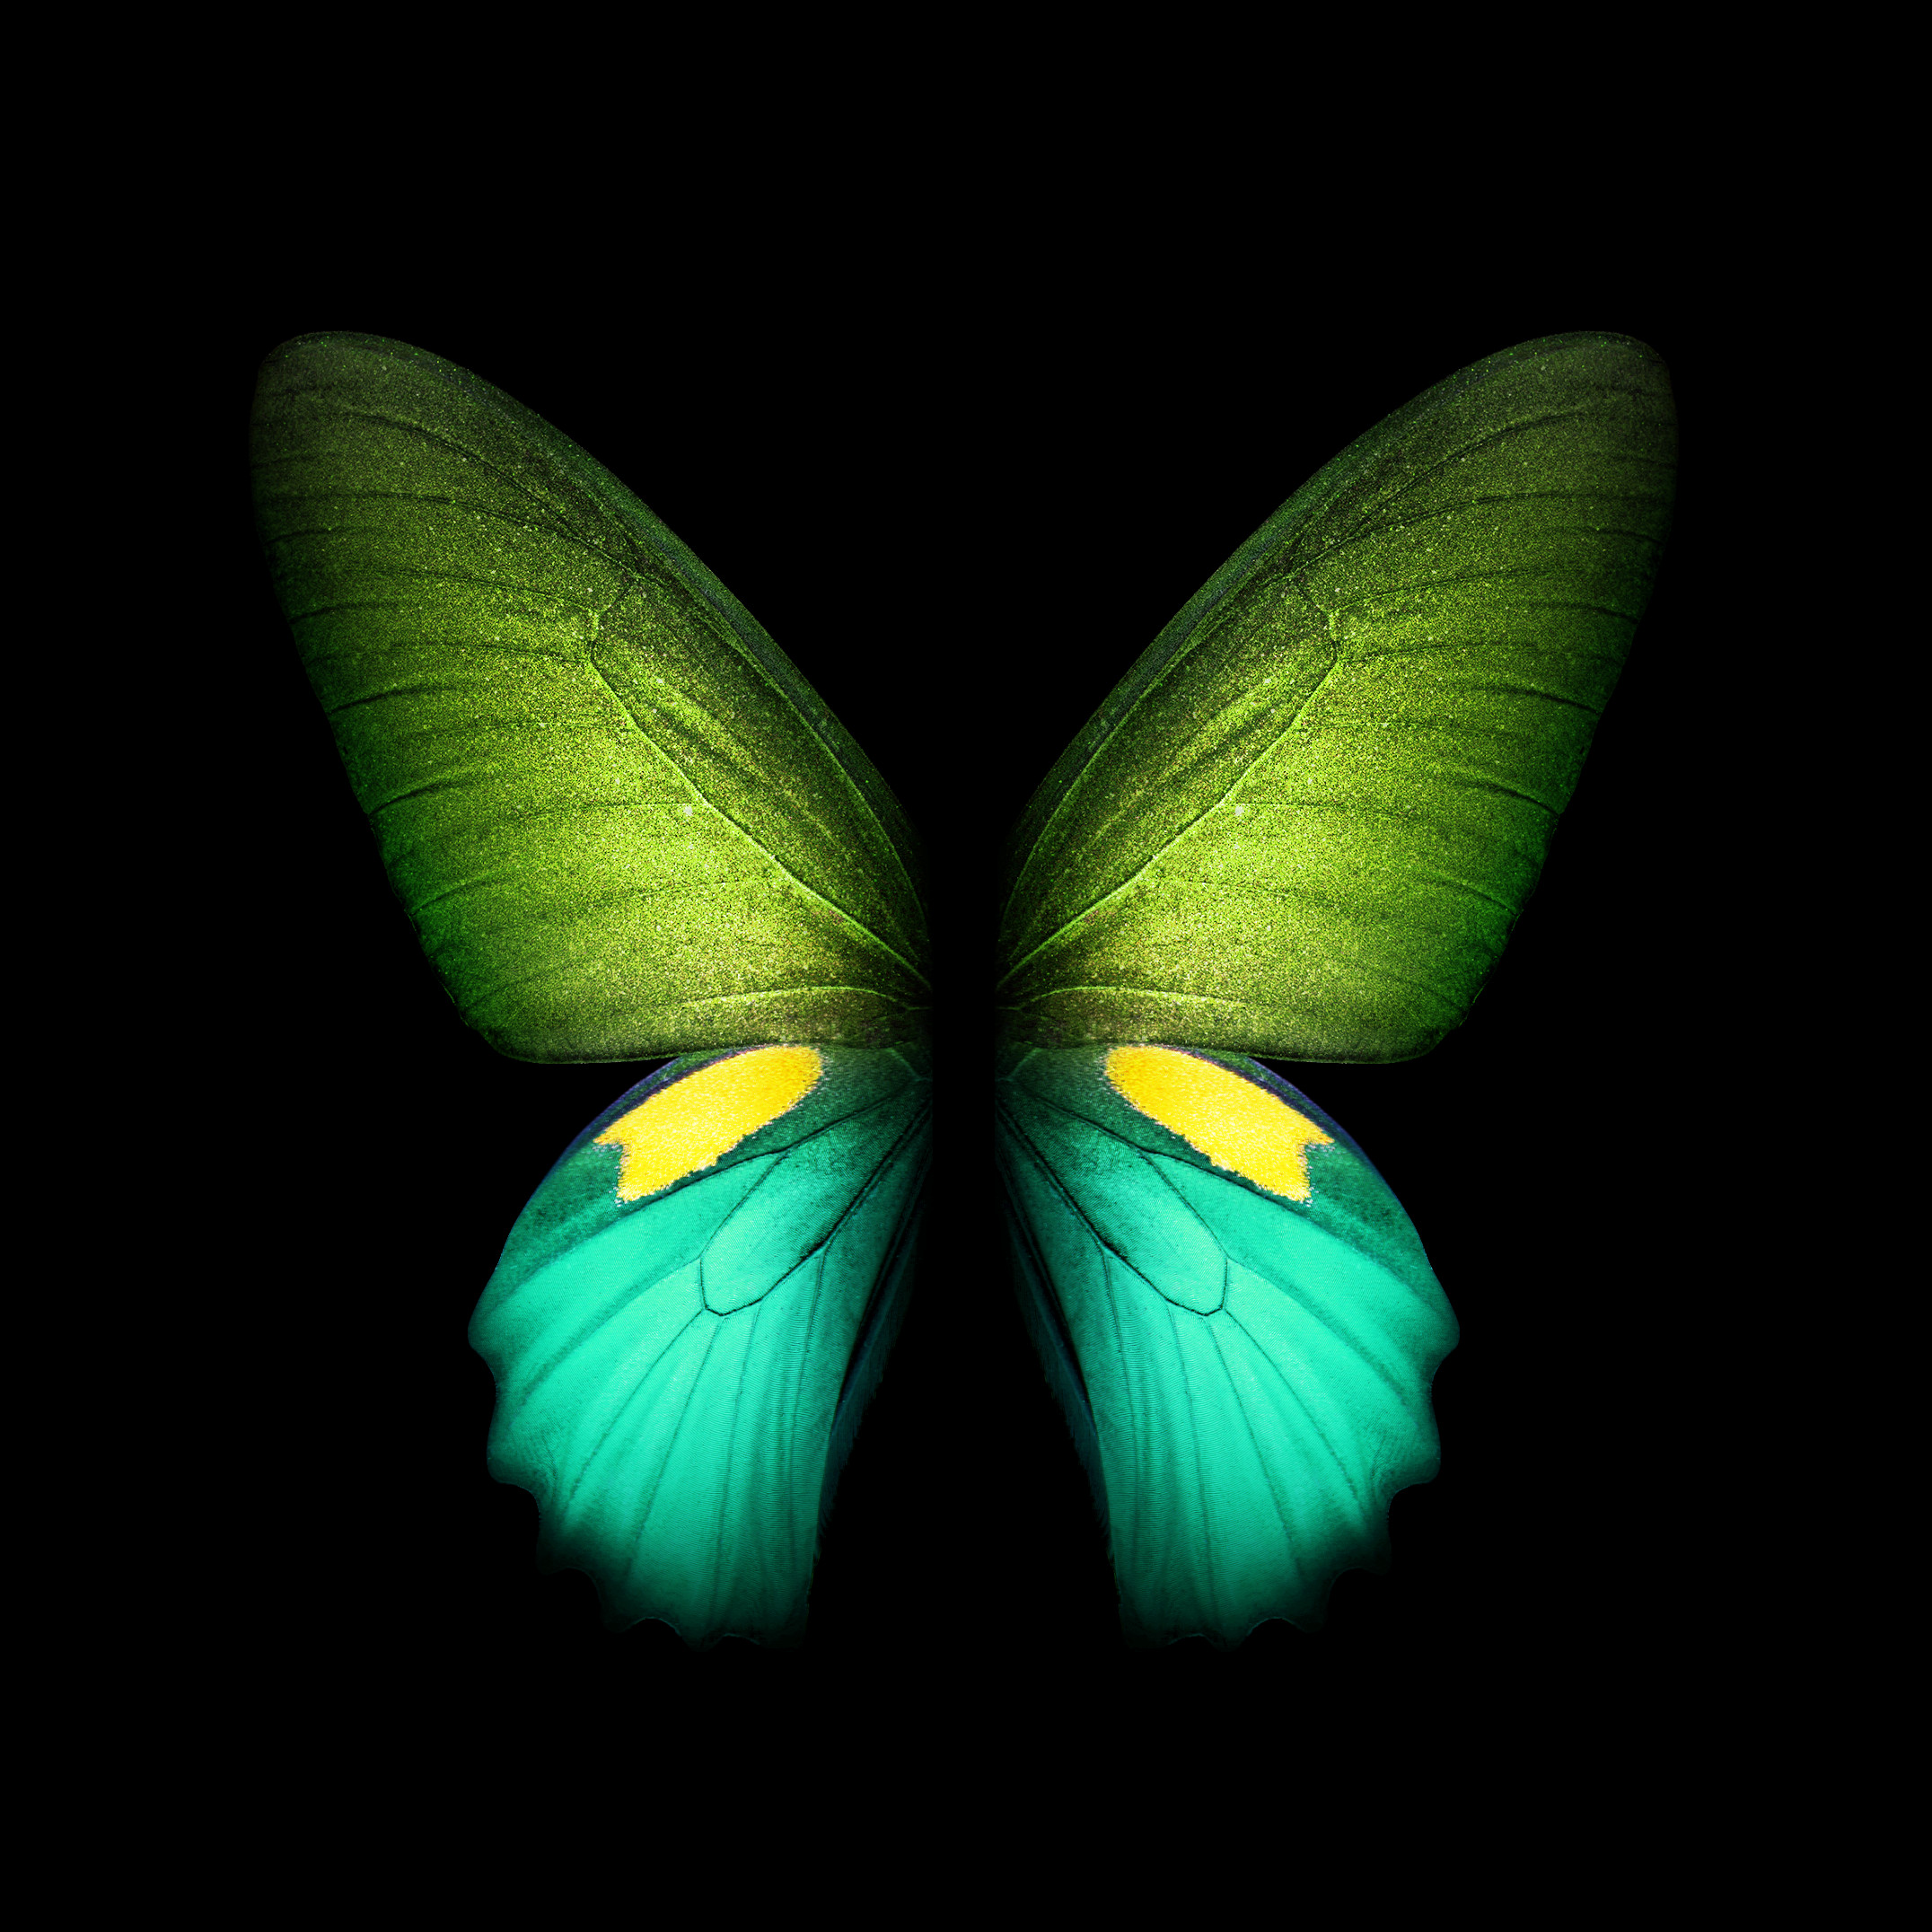 Samsung Galaxy Fold butterfly wallpaper in green with two wings.